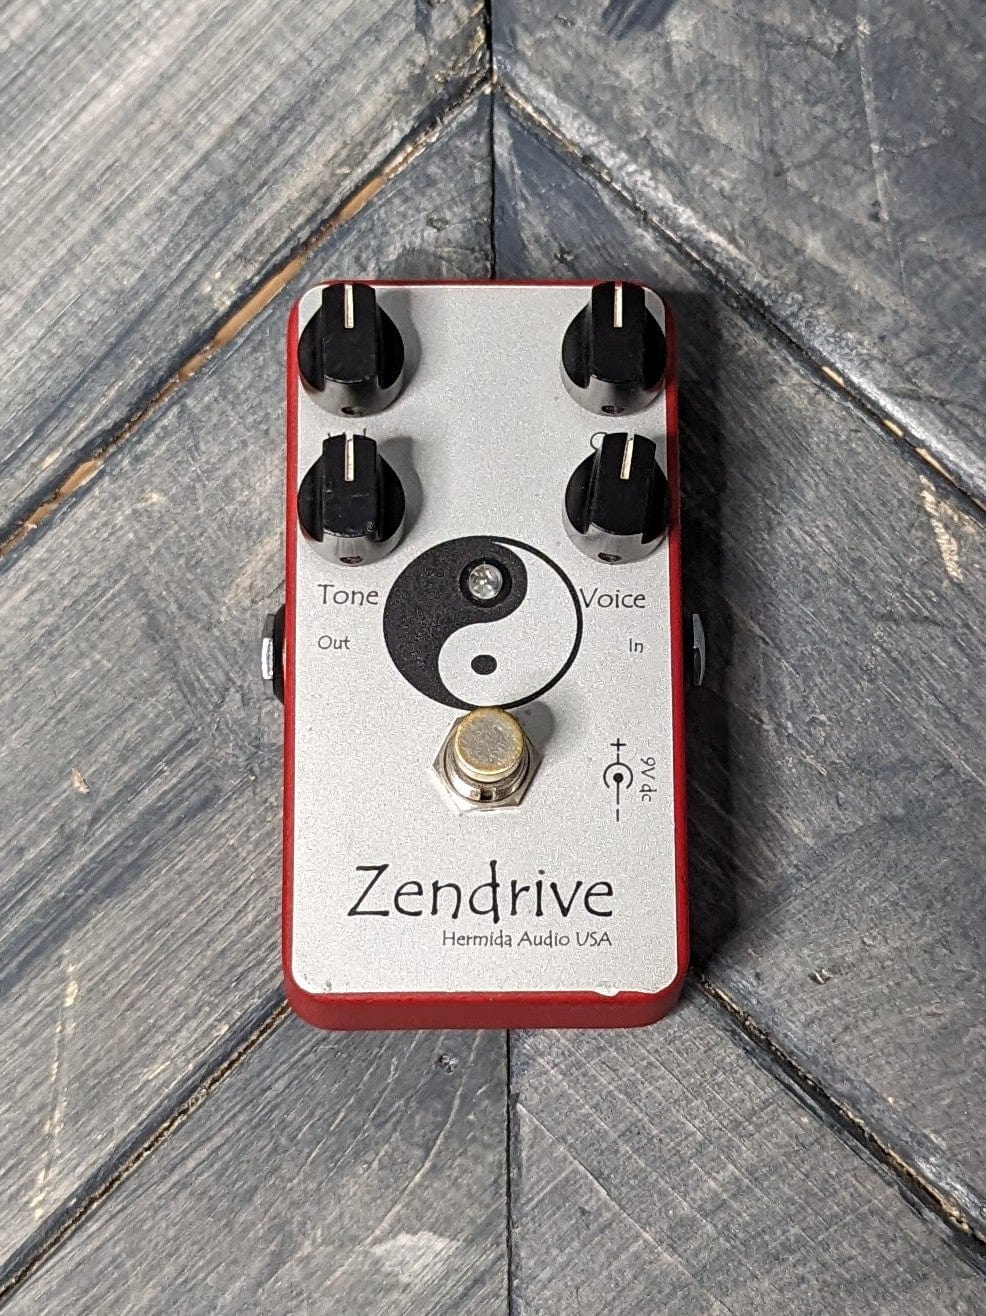 Used LovePedal Zendrive top of the pedal